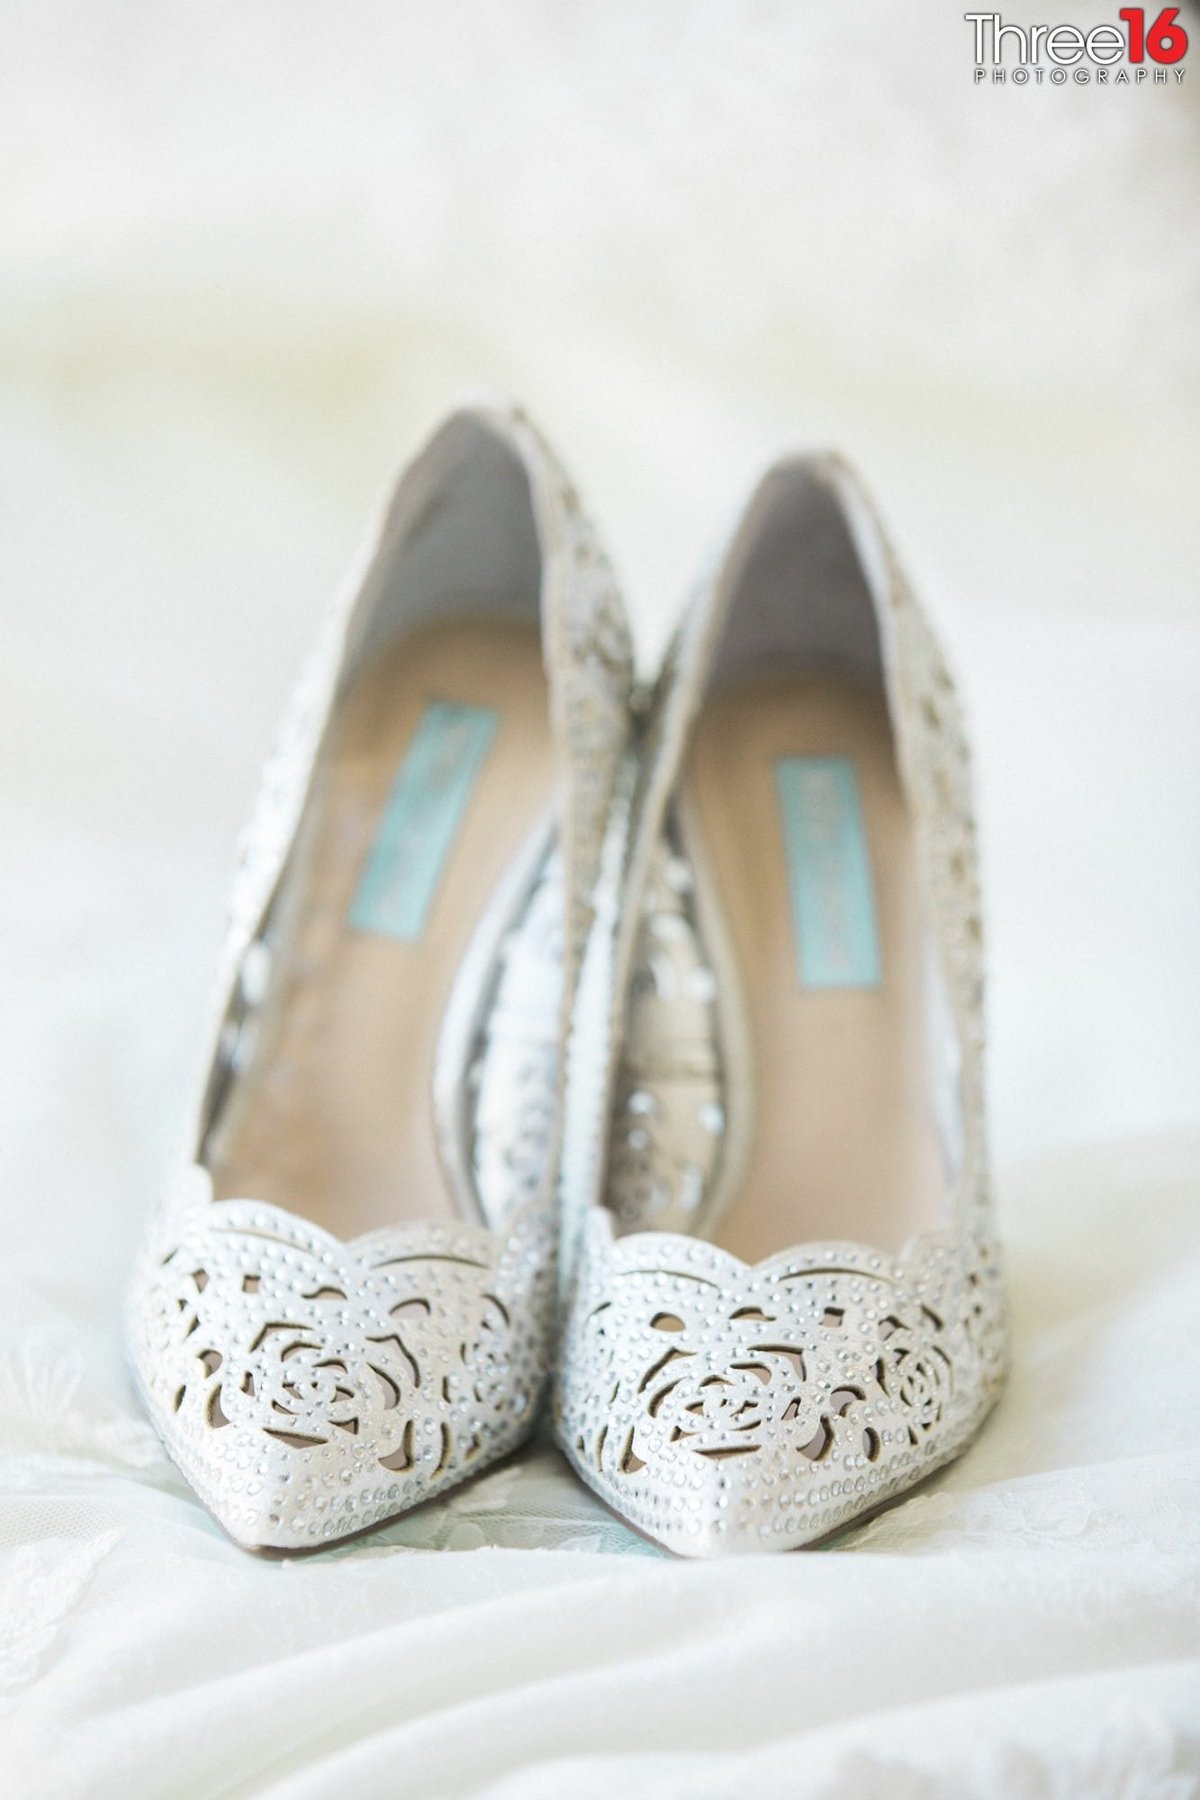 The Brides lovely wedding day shoes